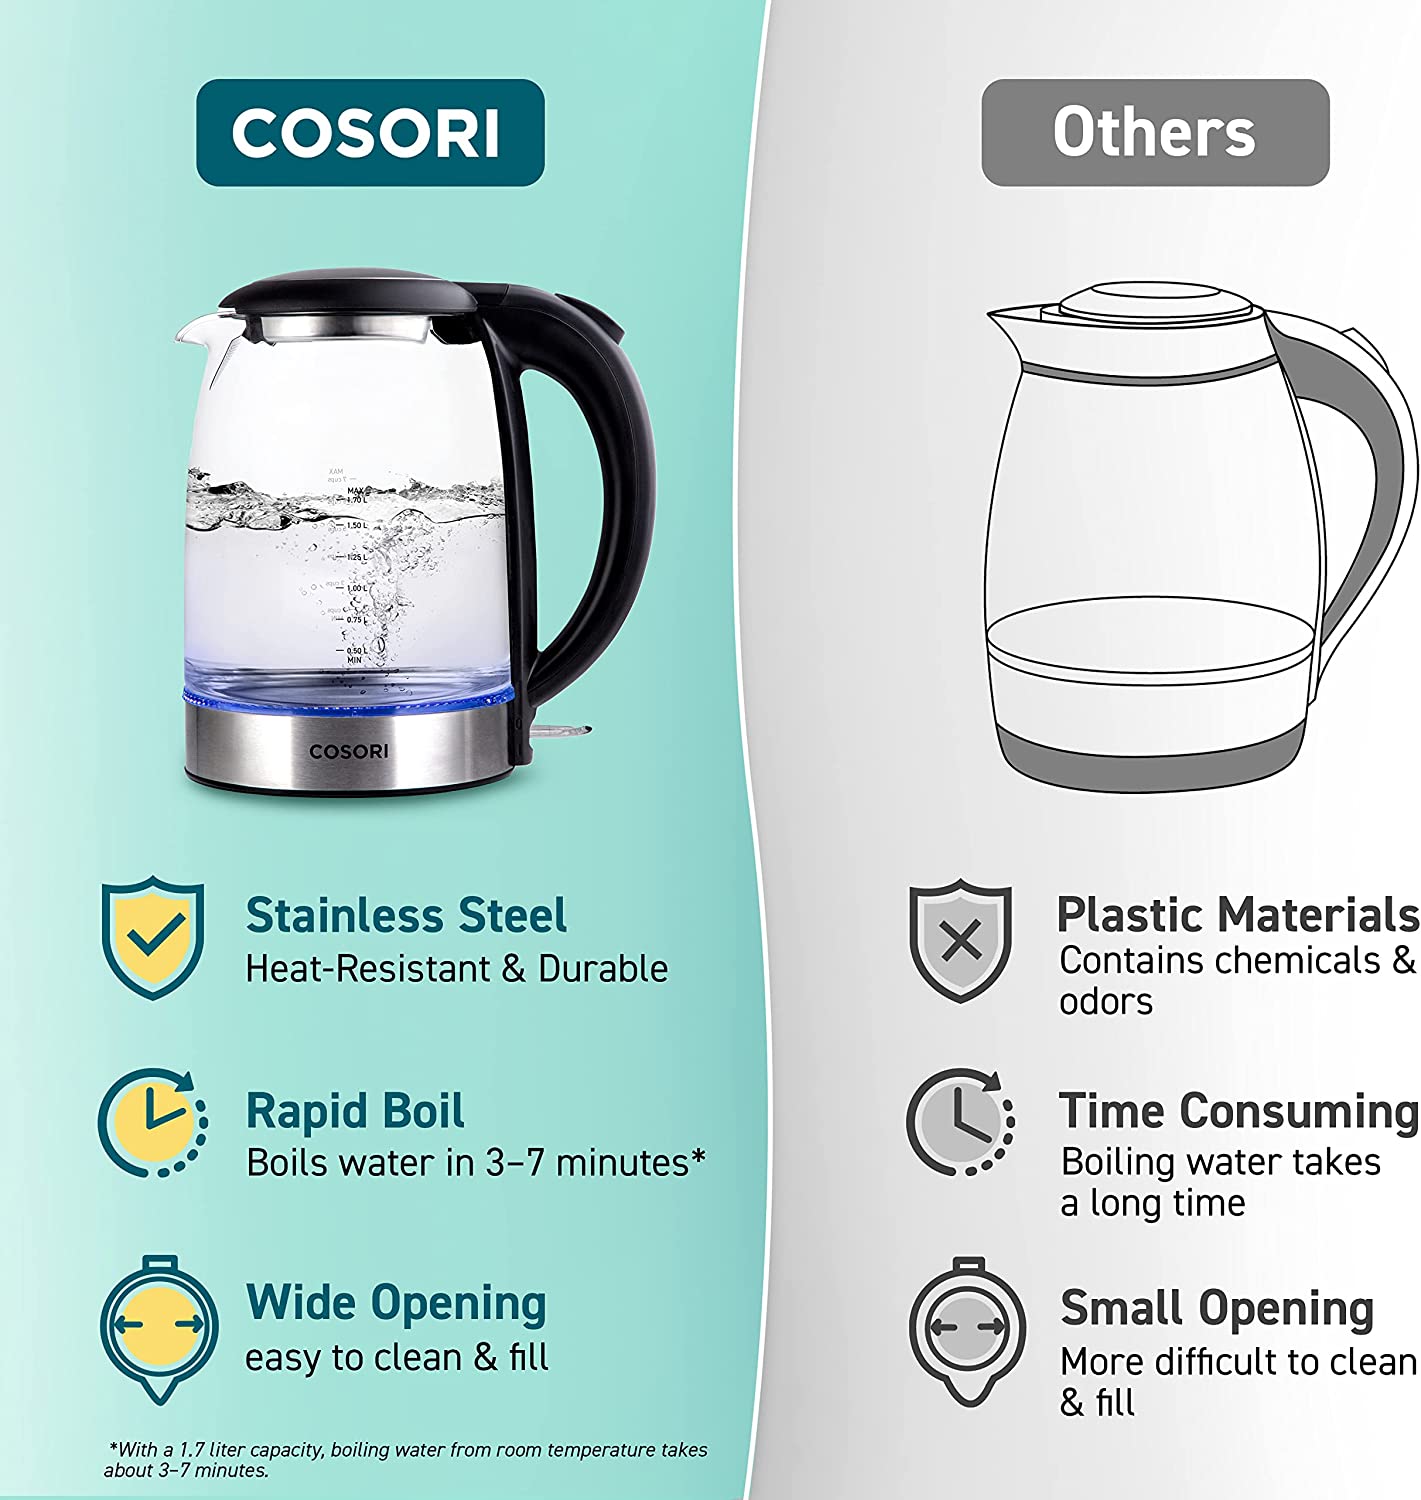 COSORI Speed-Boil Electric Kettle, 1.7L Water Boiler (BPA Free) 1500W Auto Shut-Off&Boil-Dry Protection, LED Indicator Inner Lid & Bottom, Black